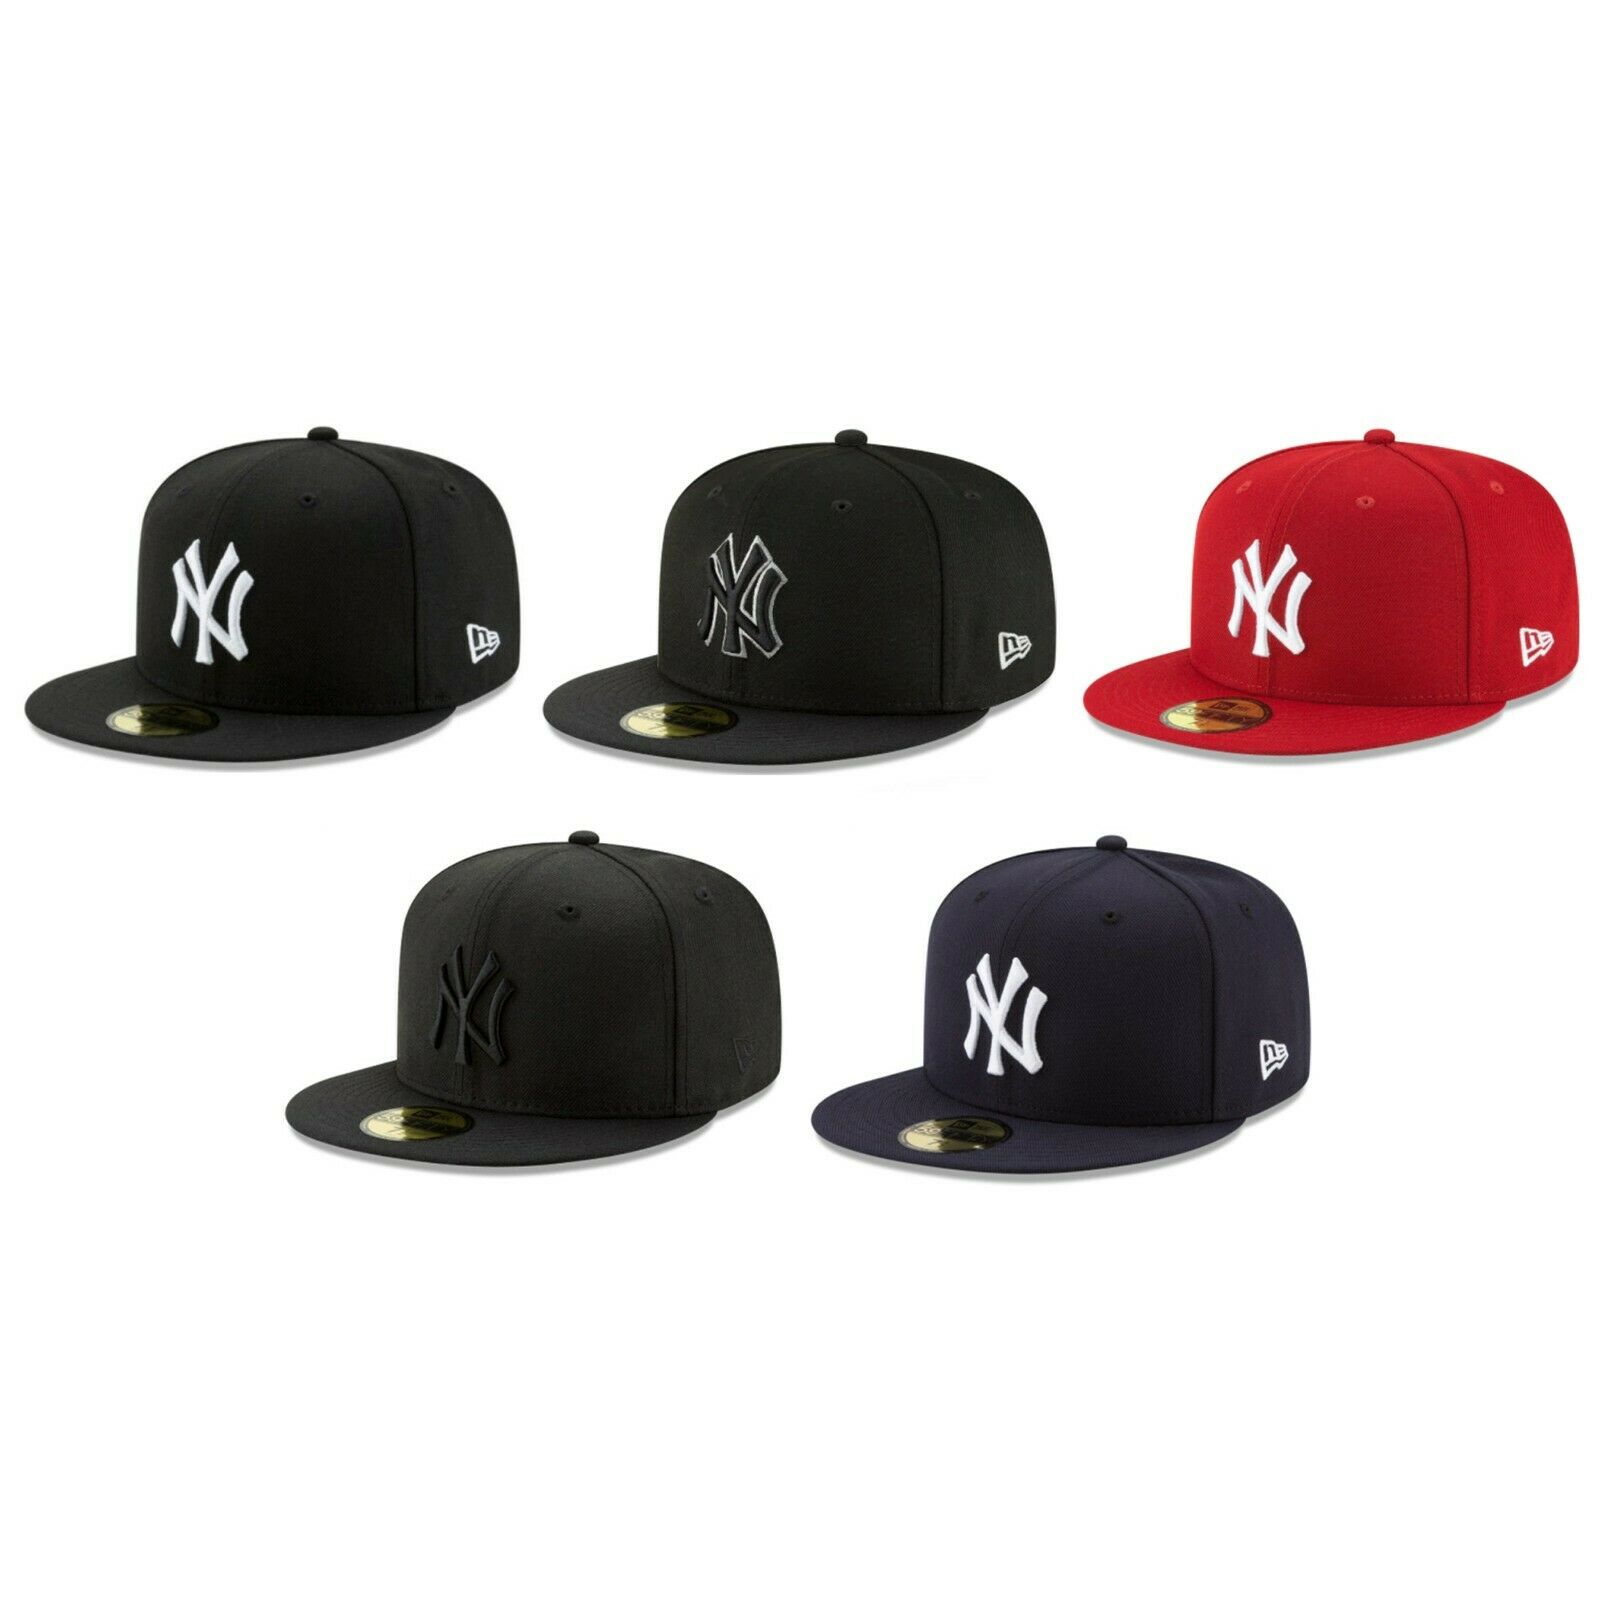 New York Yankees Nyy Mlb Authentic New Era 59fifty Fitted Cap -5950 Baseball Hat